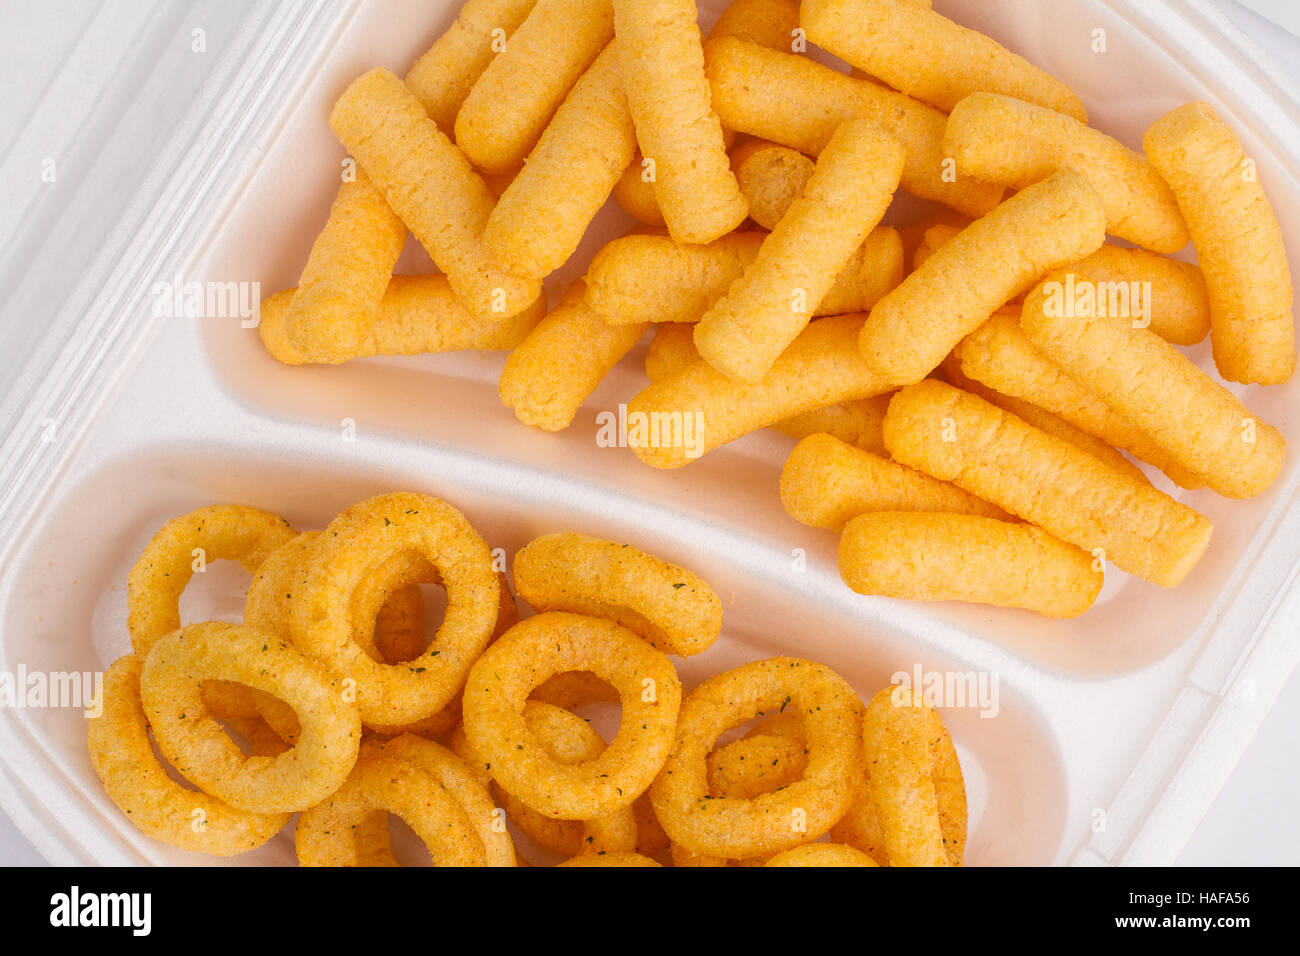 Polystyrene chips for packaging - Stock Image - A850/0174 - Science Photo  Library